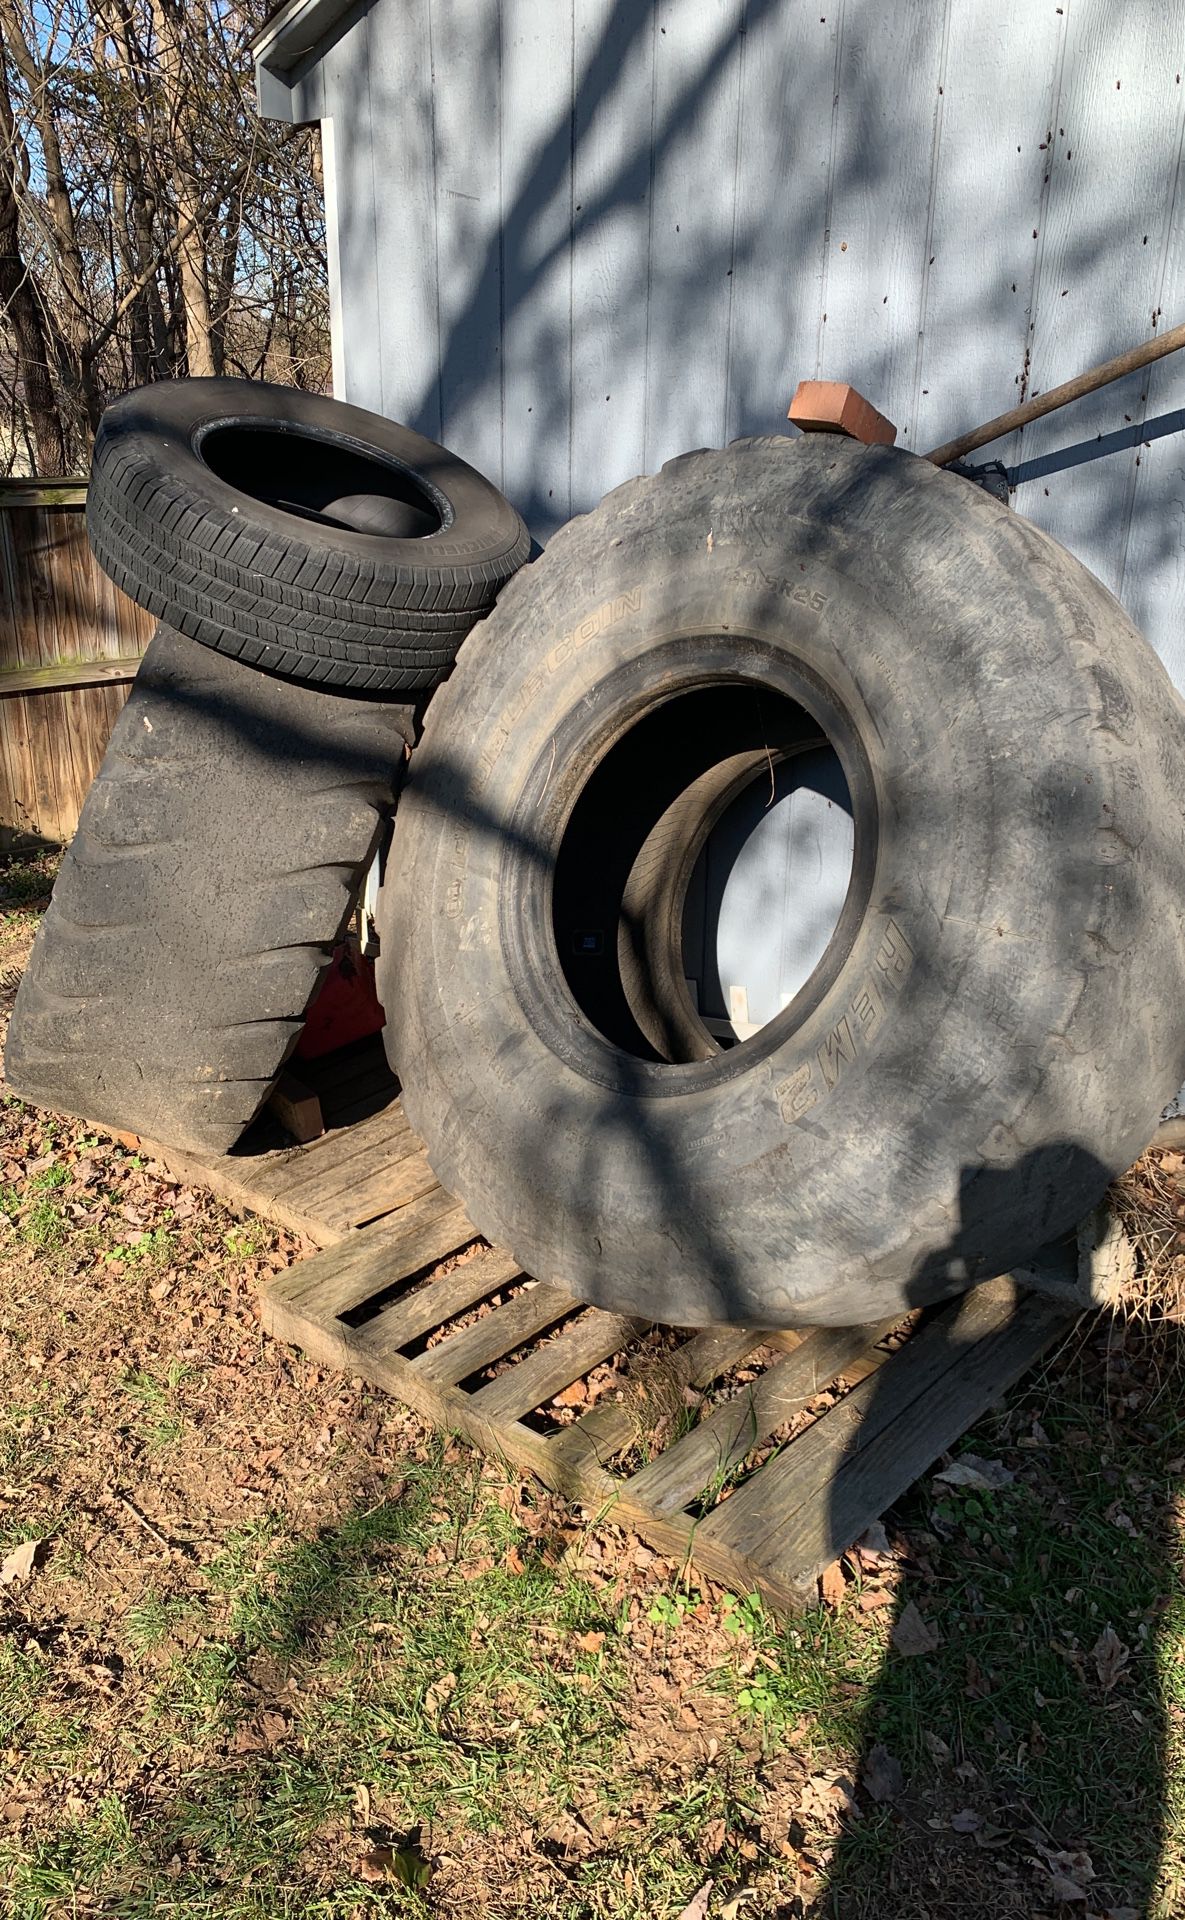 Exercise tires need gone